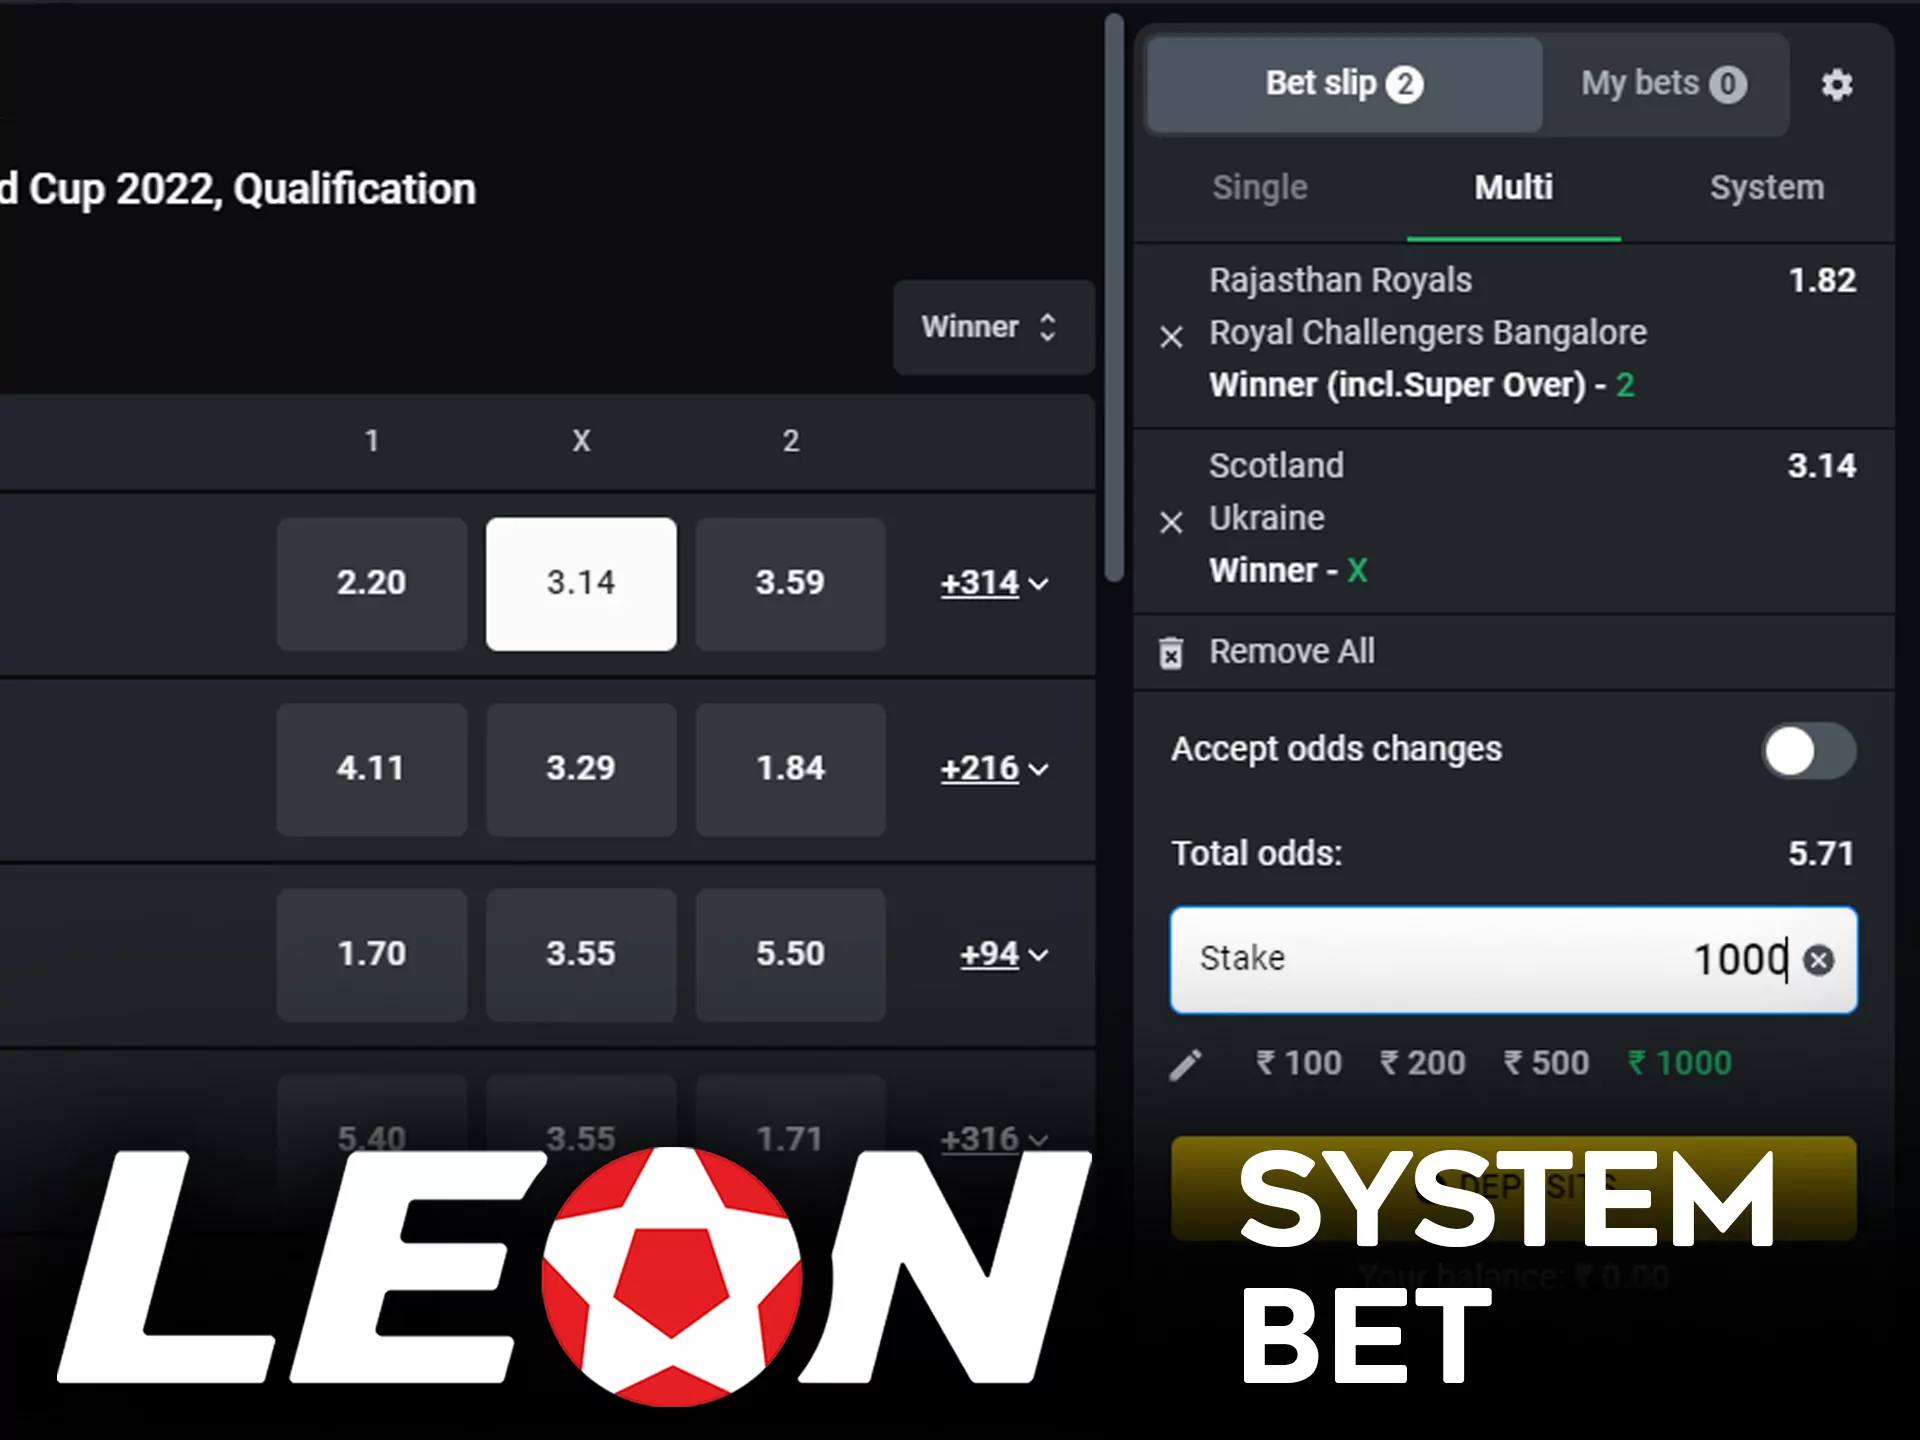 Place system bets at Leon Bet.